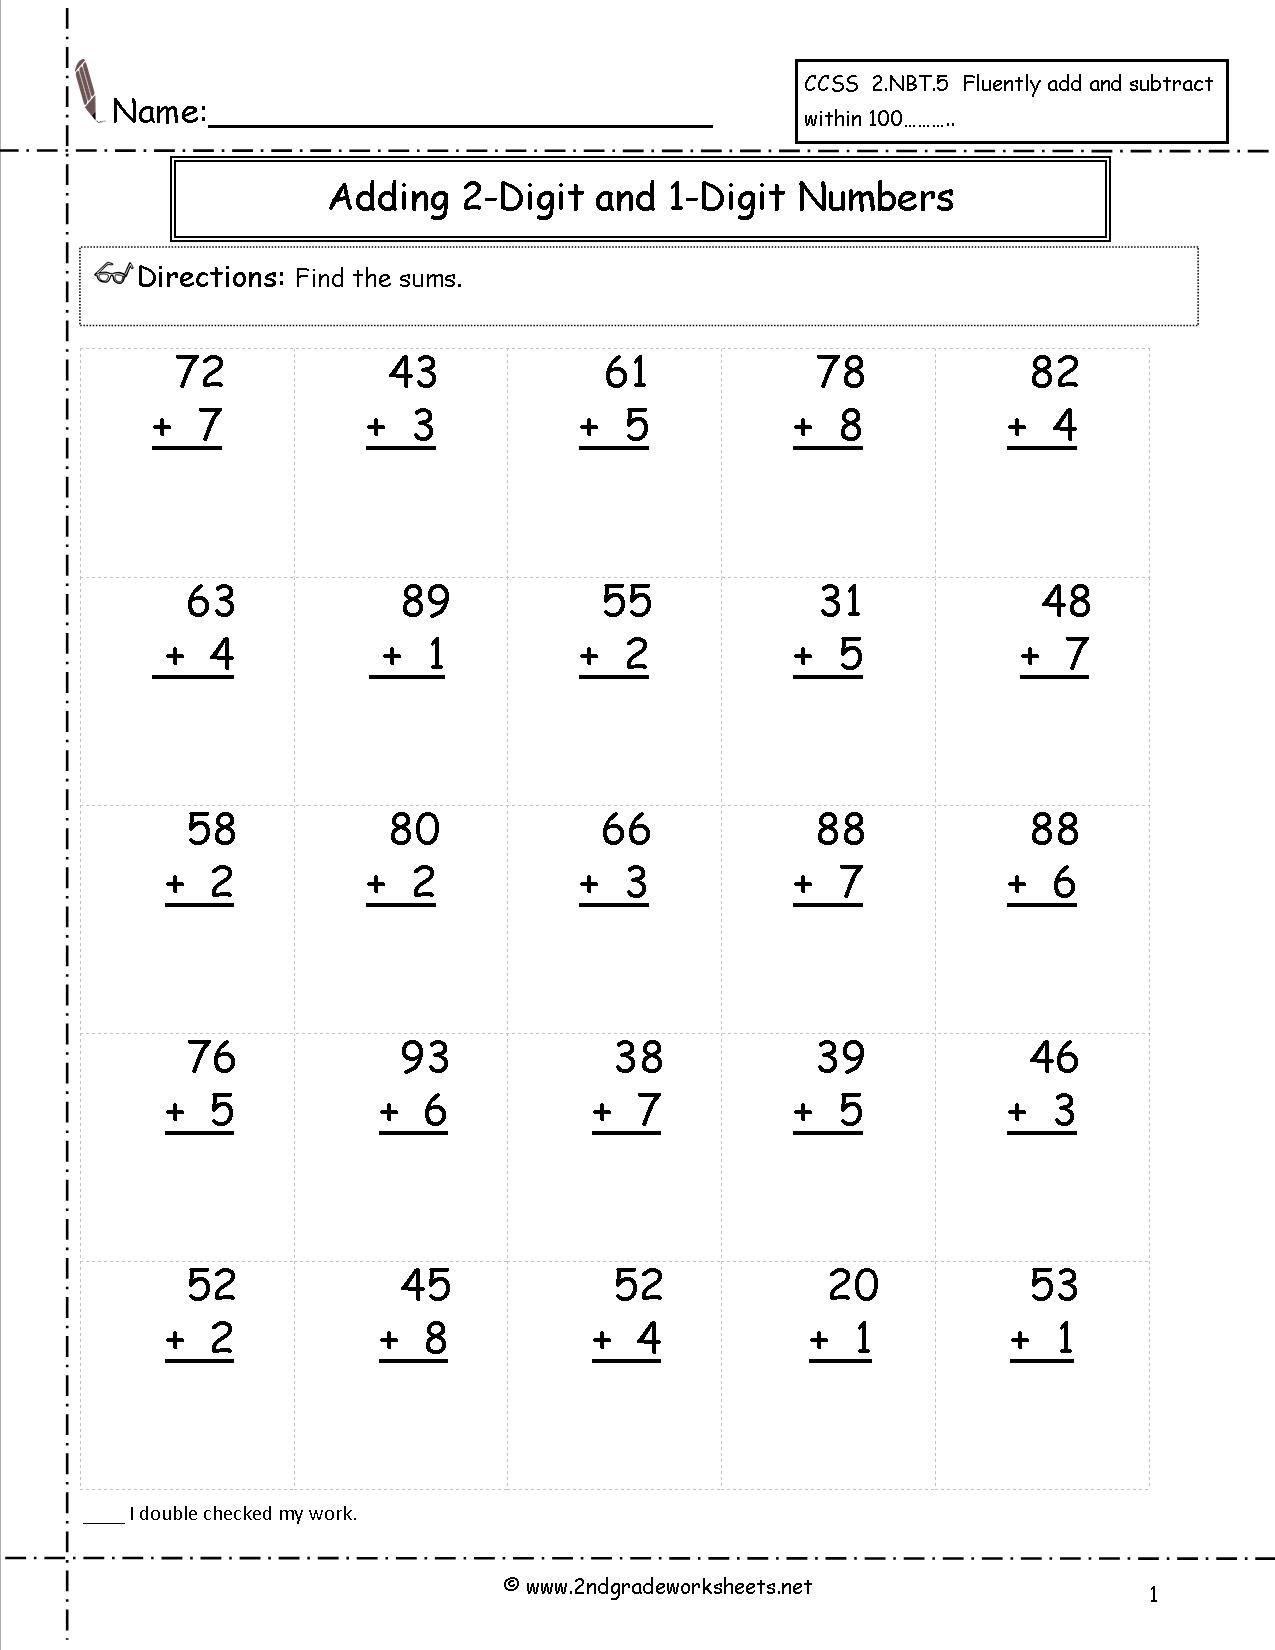 Adding Two Digit And One Digit Numbers | Satta | Pinterest - Free Printable Two Digit Addition Worksheets